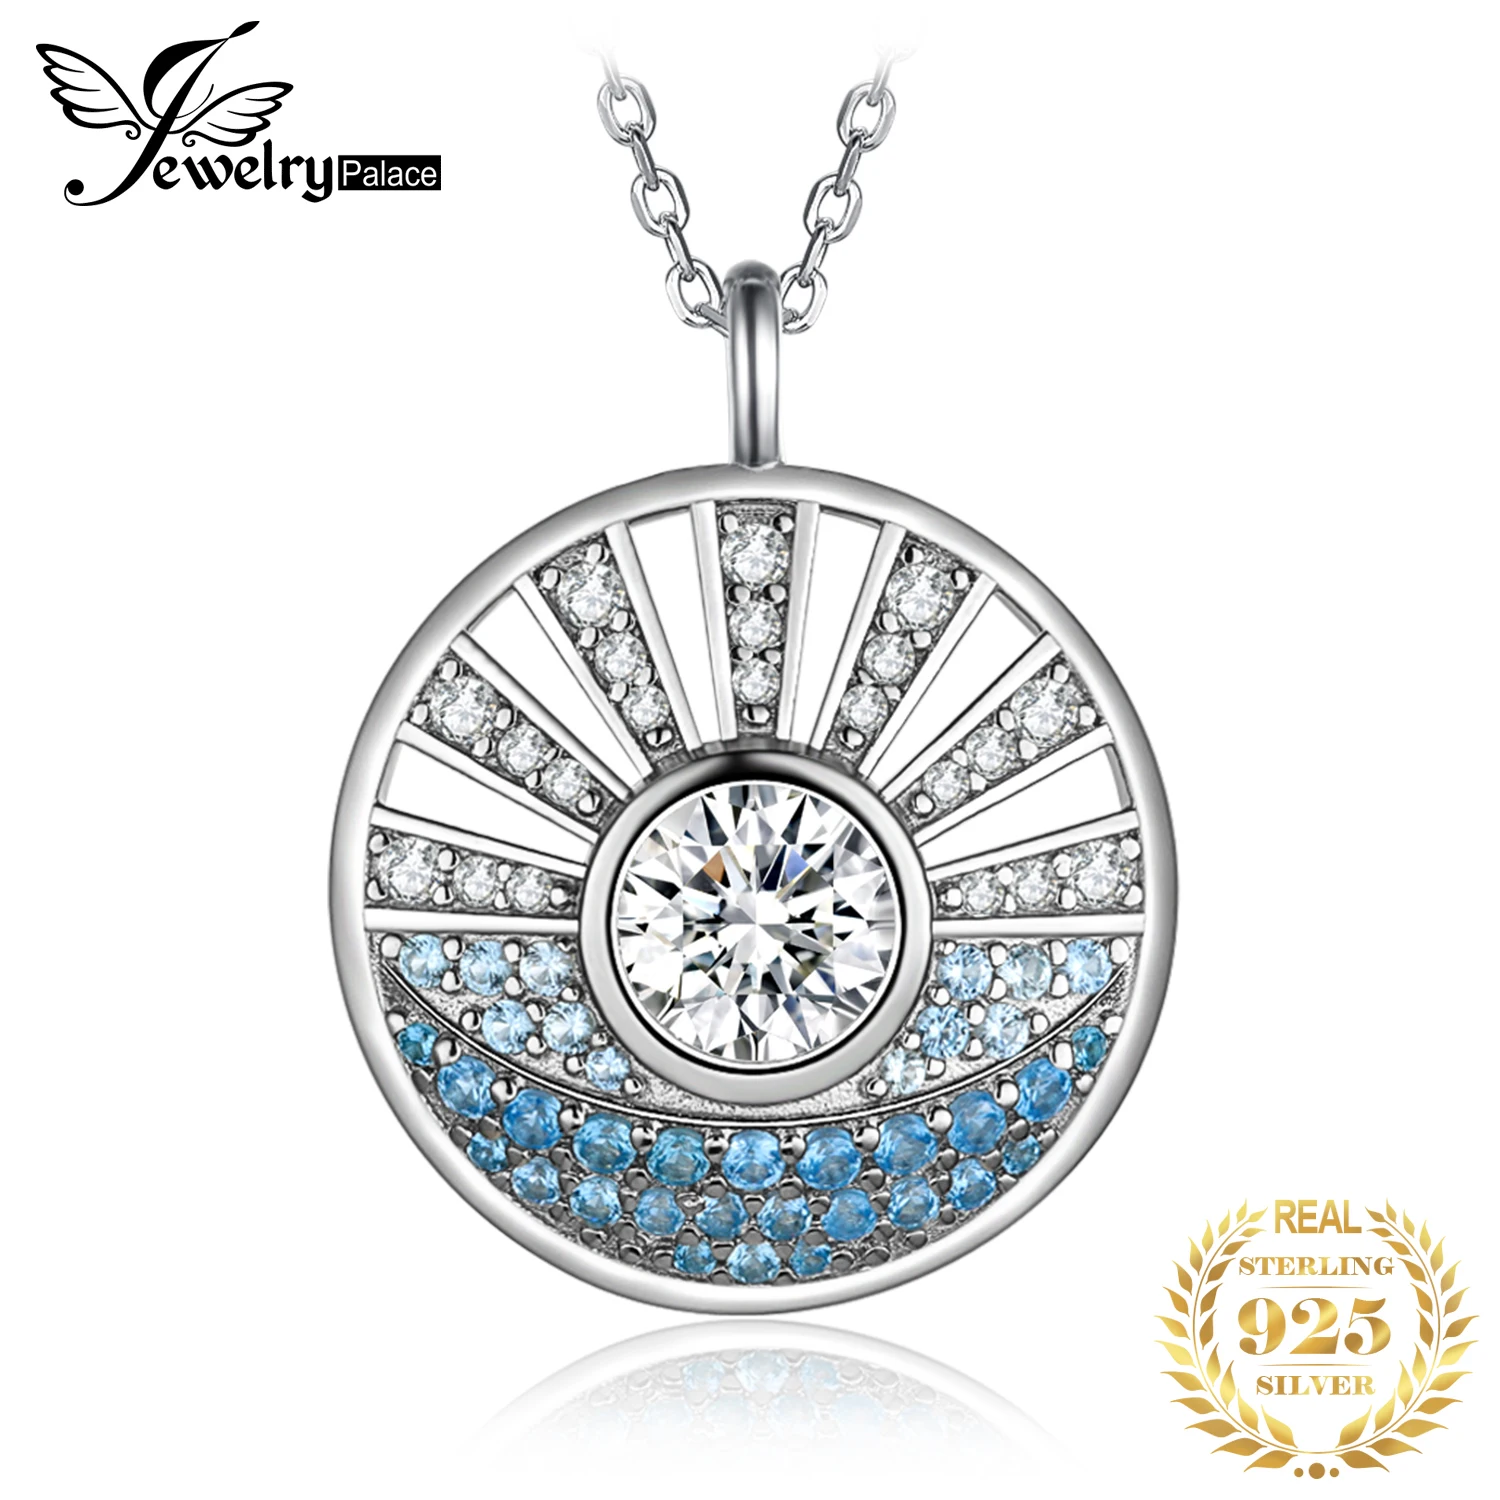 

JewelryPalace New Arrival Sunrise Sea 1.6ct Round Cubic Zirconia 925 Sterling Silver Pendant Necklace for Woman Gift No Chain